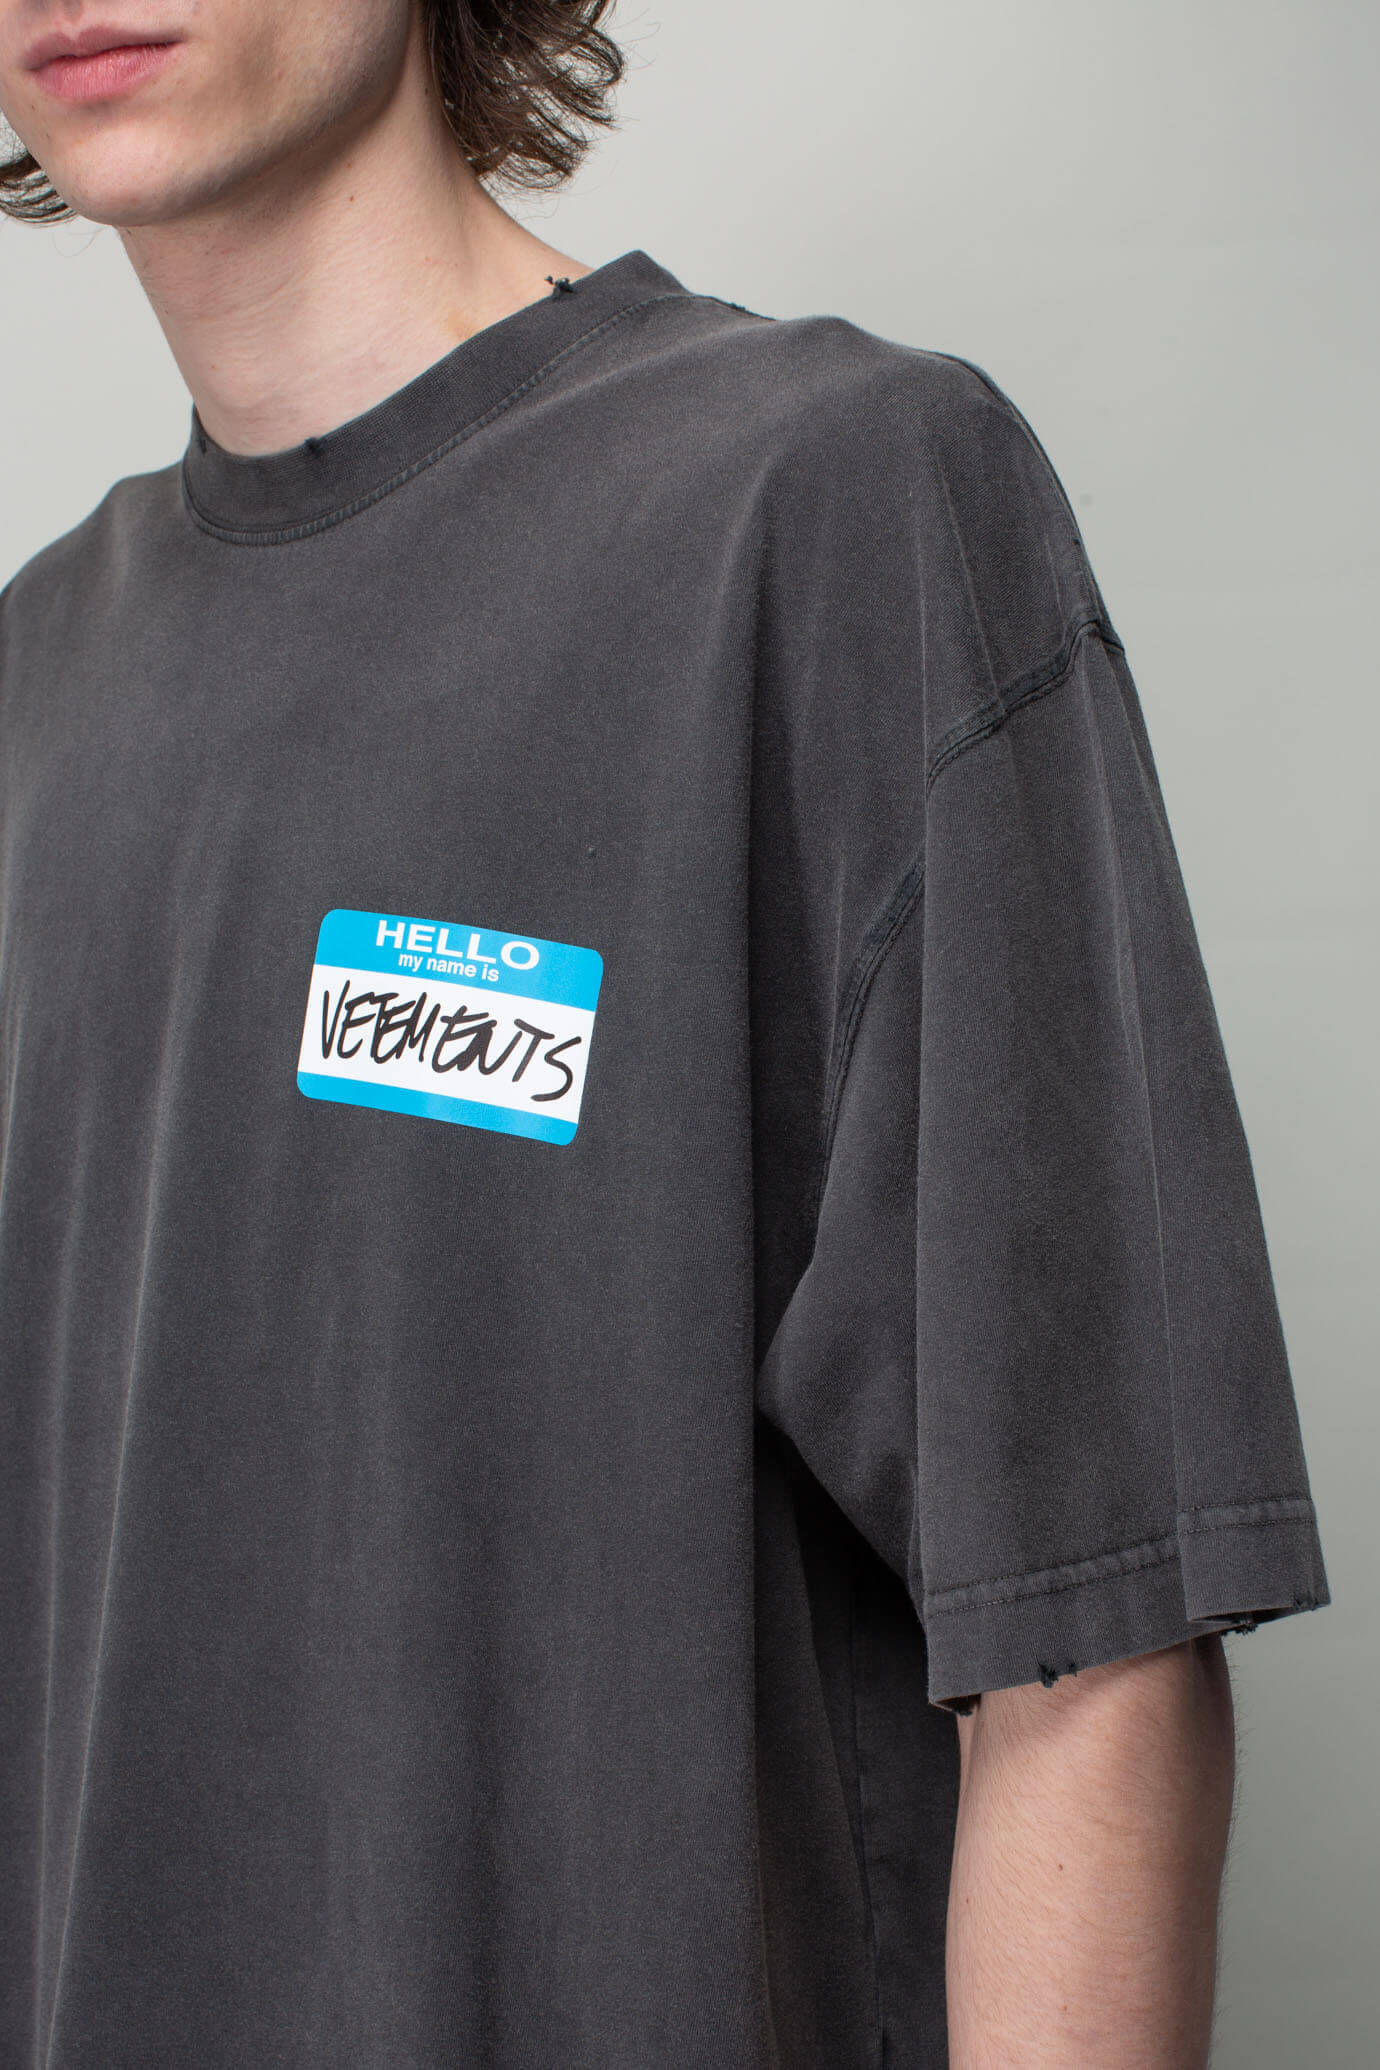 VETEMENTS MY NAME IS SHIRT